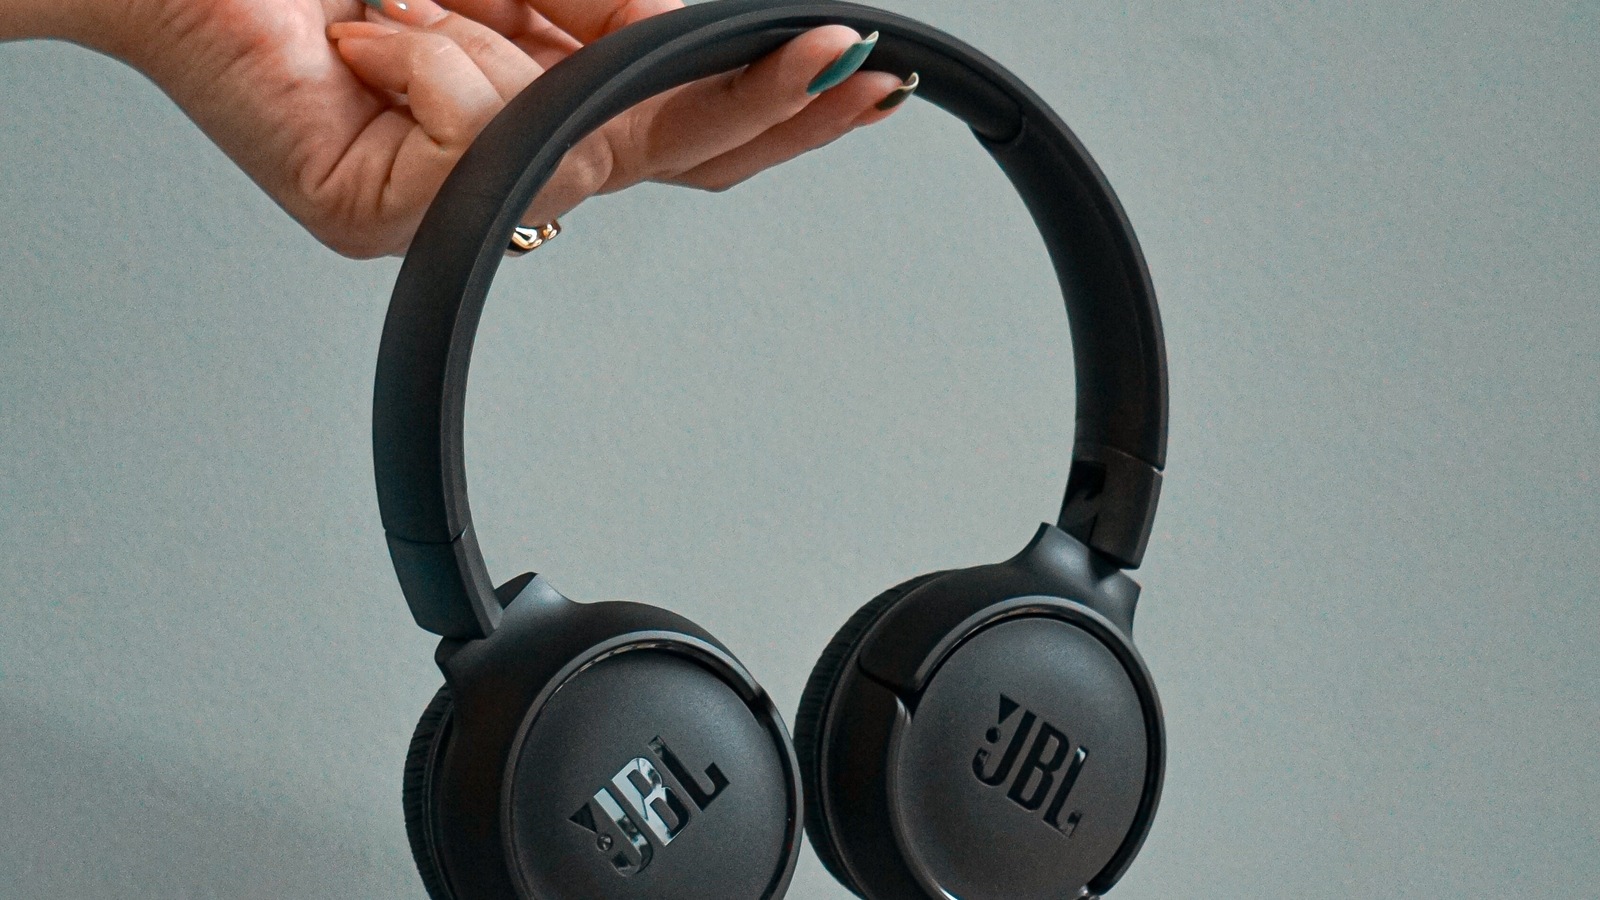 JBL Tune 710BT by Harman, 50 Hours Playtime with Quick Charging Wireless  Over Ear Headphones with Mic